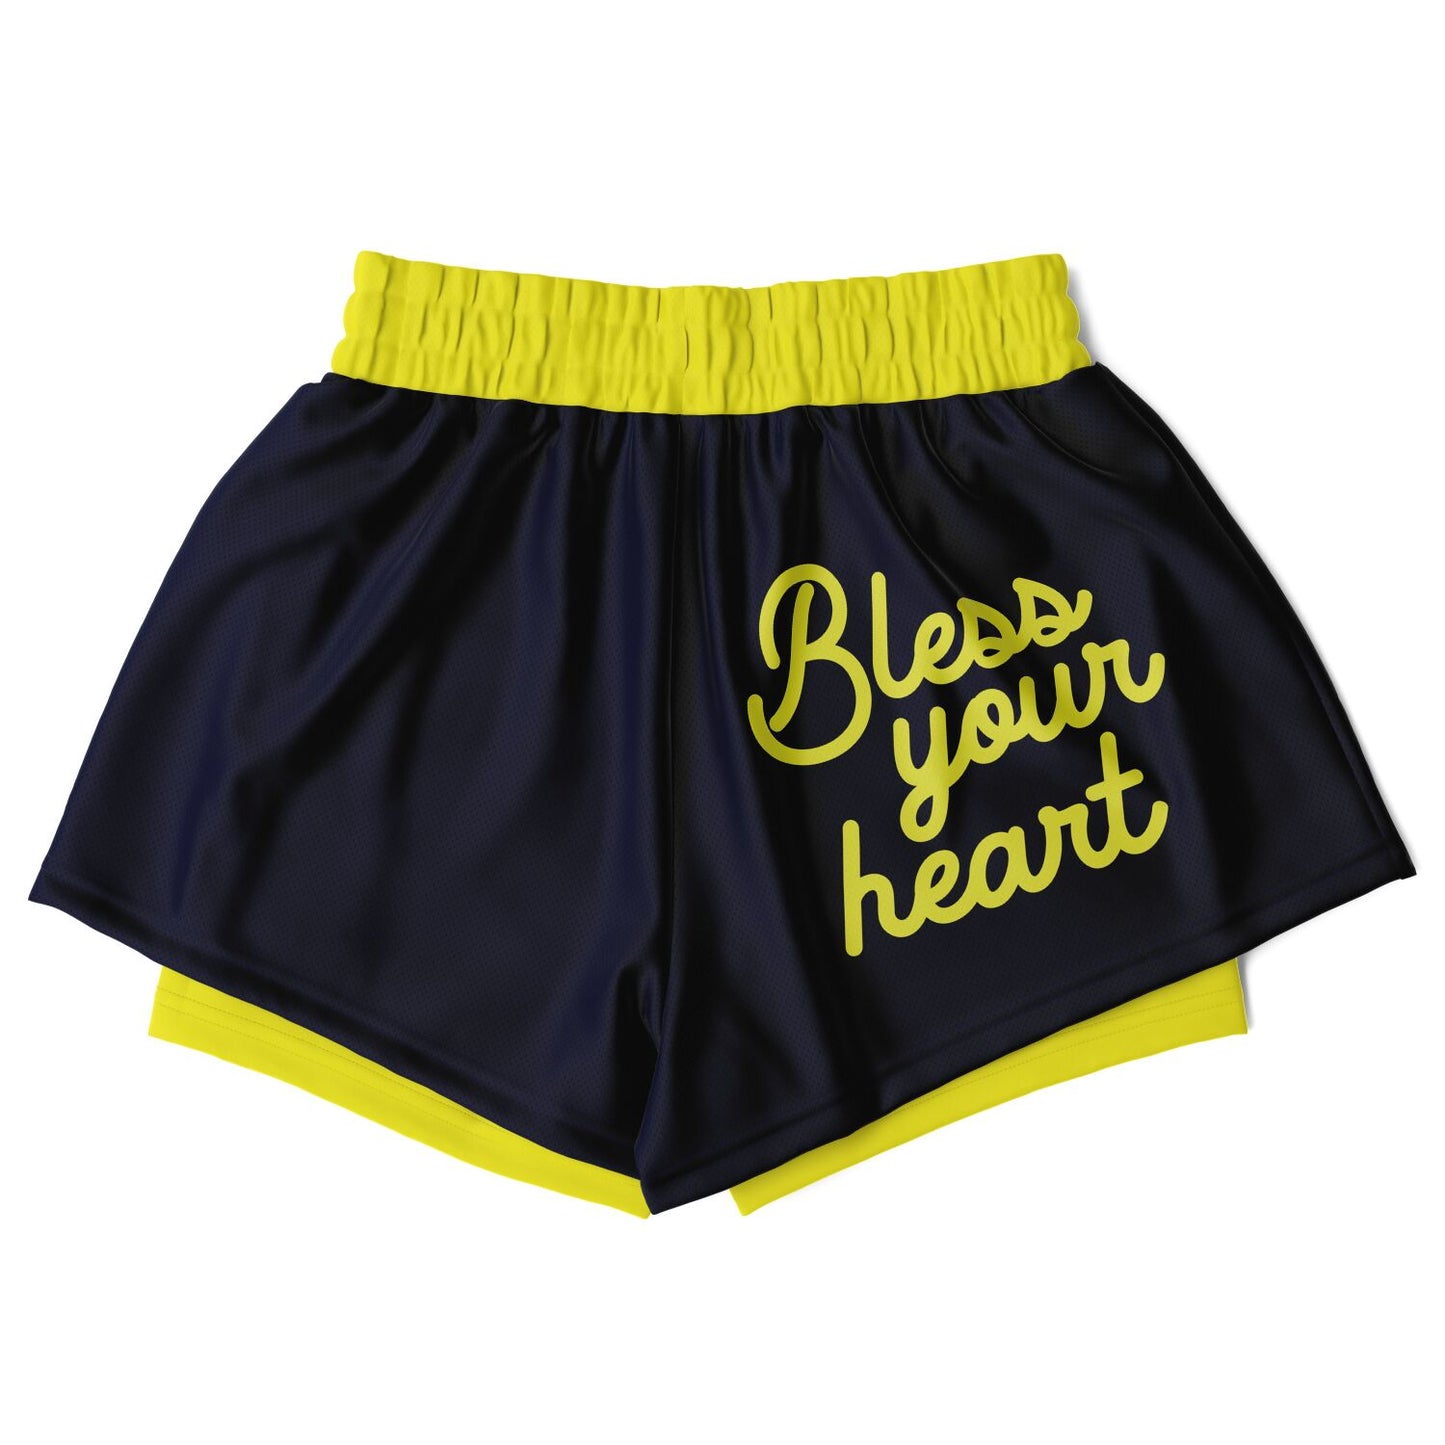 Bless Your Heart 2 in 1 Women's shorts